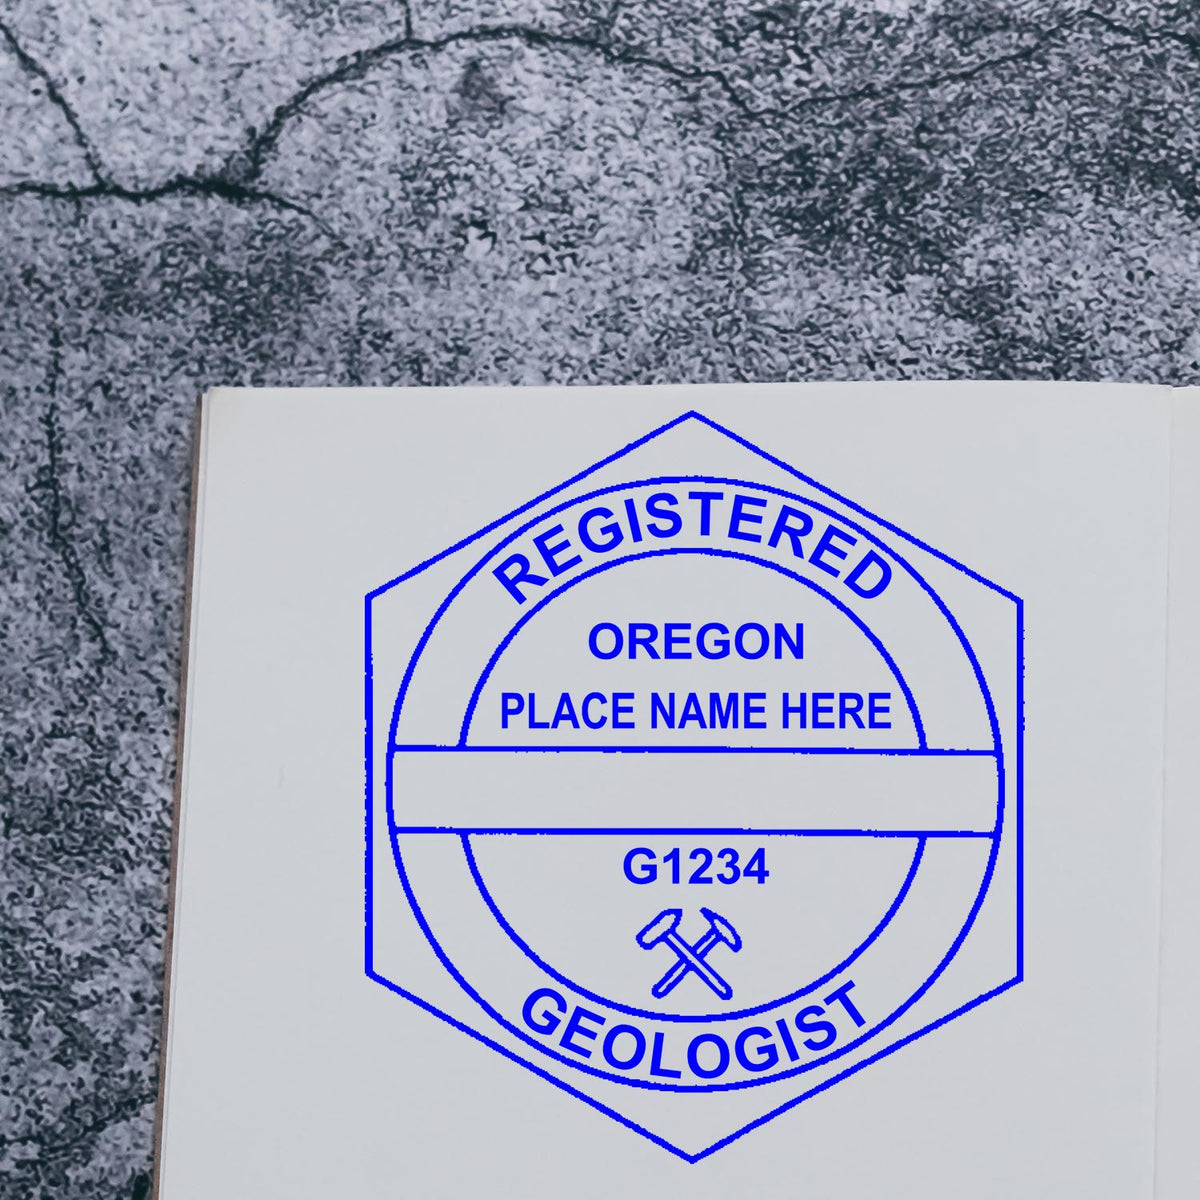 Another Example of a stamped impression of the Premium MaxLight Pre-Inked Oregon Geology Stamp on a office form